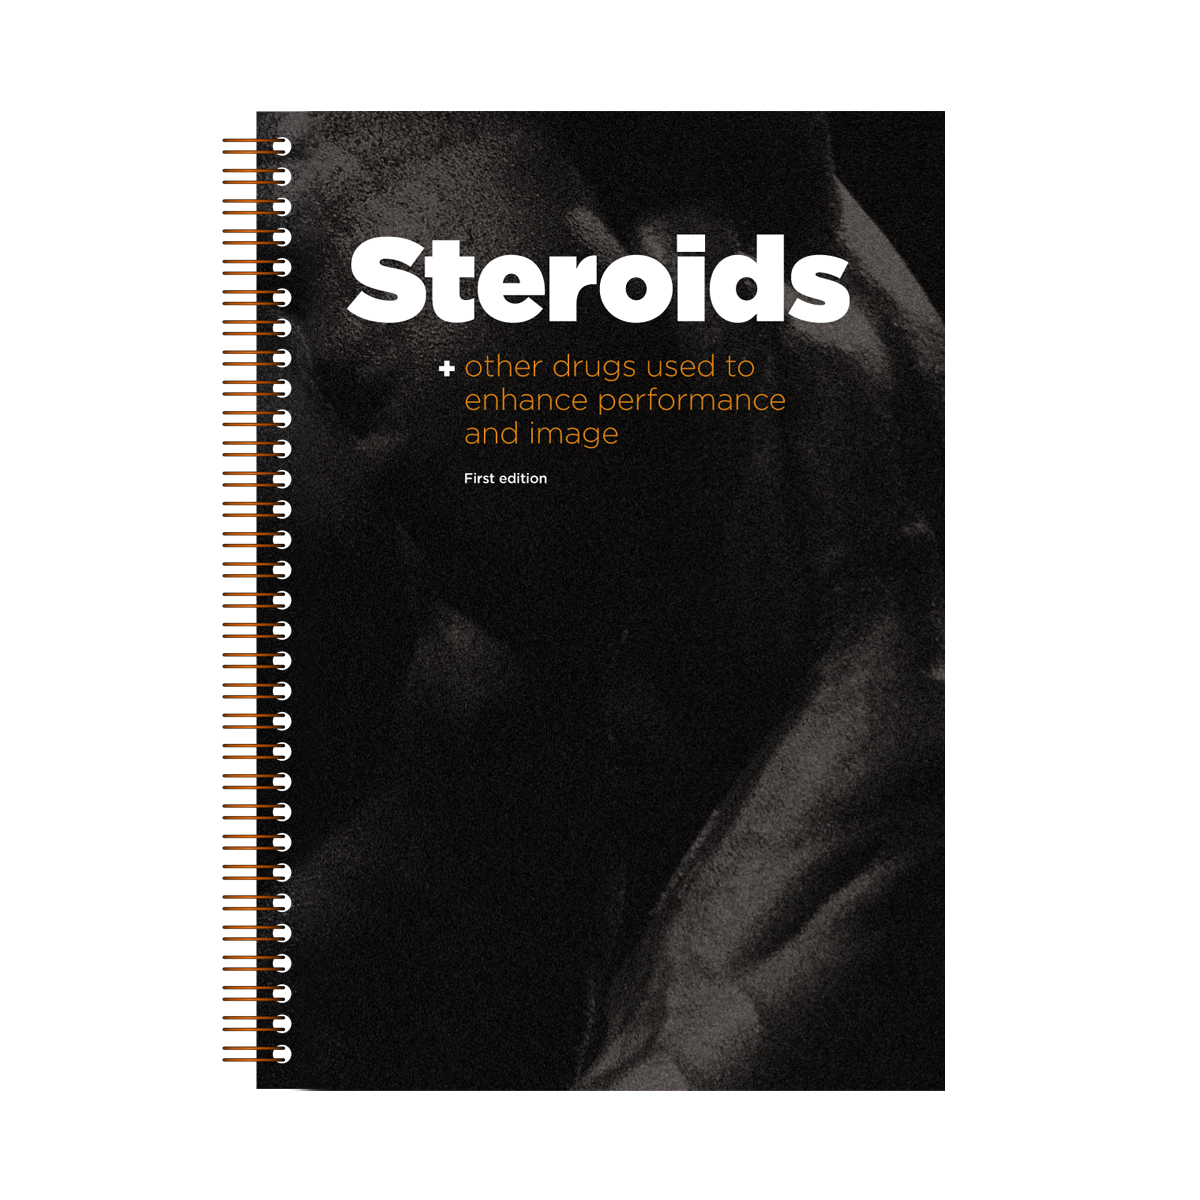 Guide to Steroids and other drugs used to enhance Image and Performance